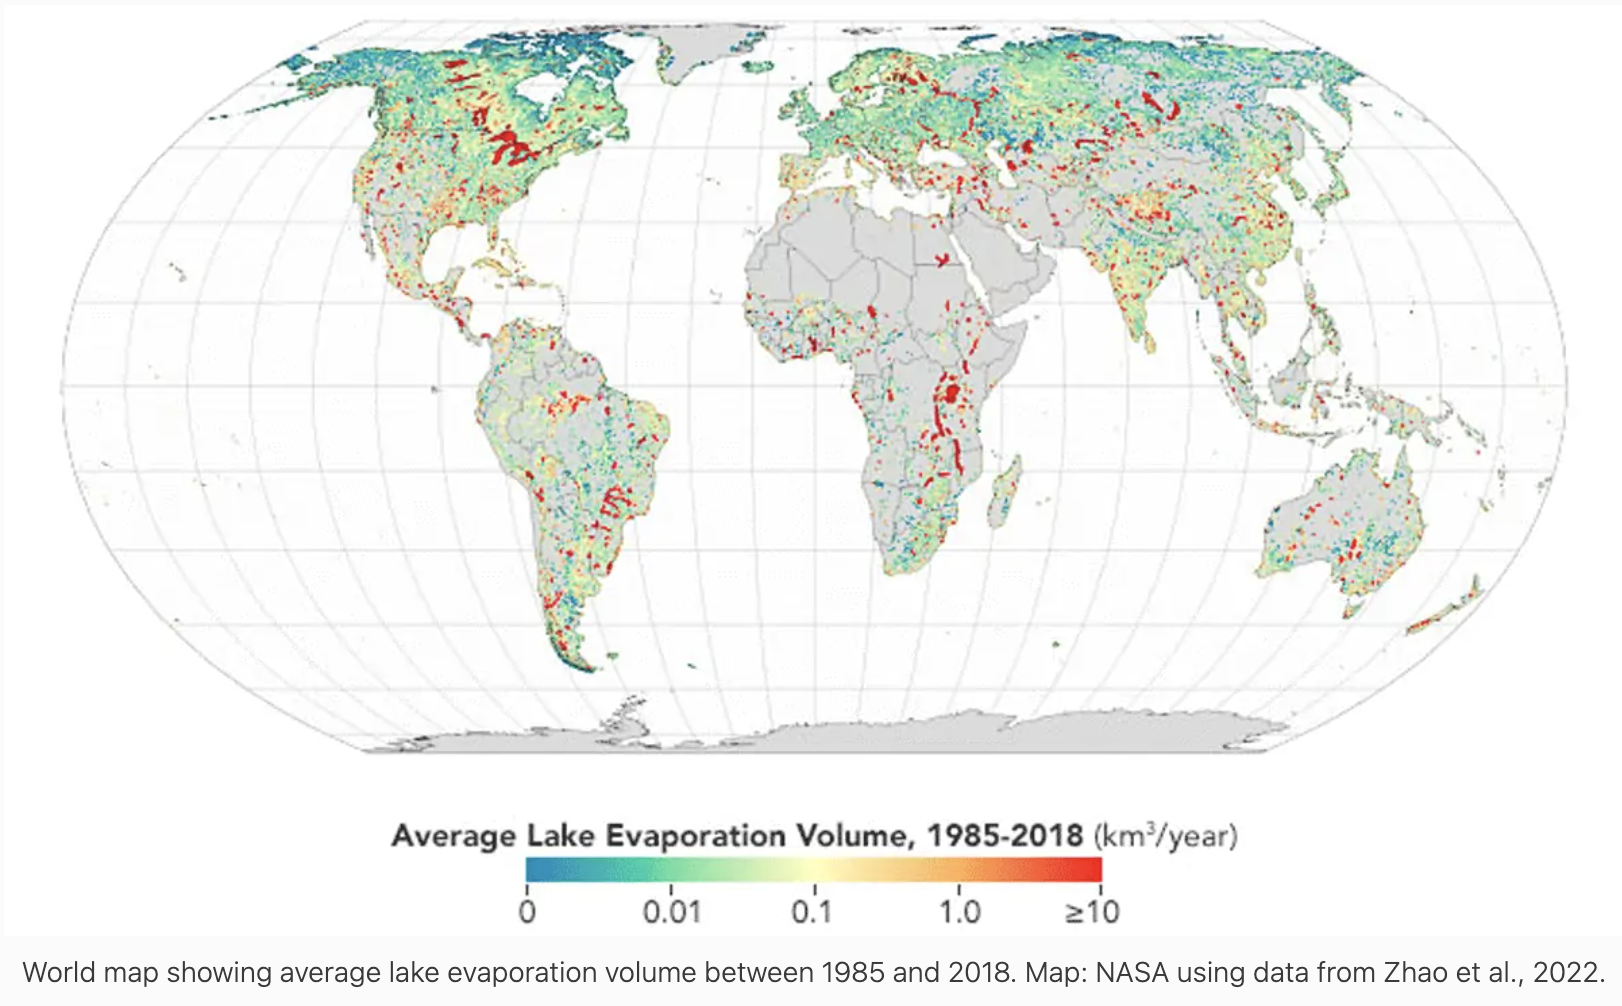 A global map showing lake evaporation volume from 1985 to 2018.